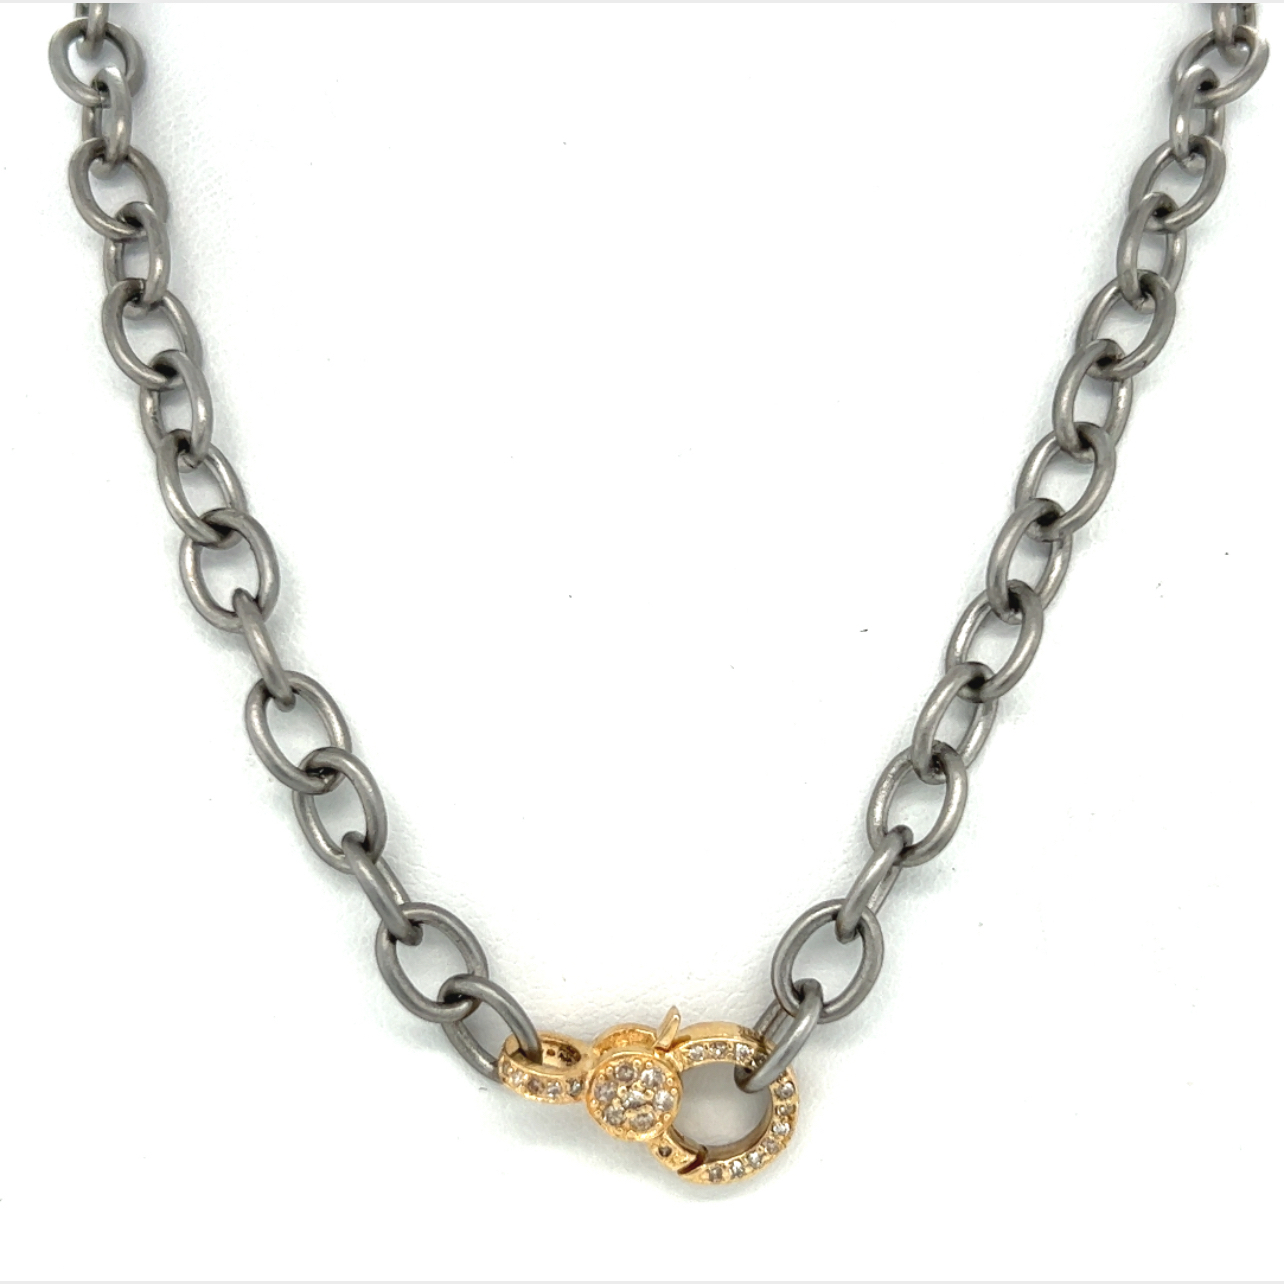 Featured image for “18 Inch Oxidized Chain with 14 Karat Gold Clasp”